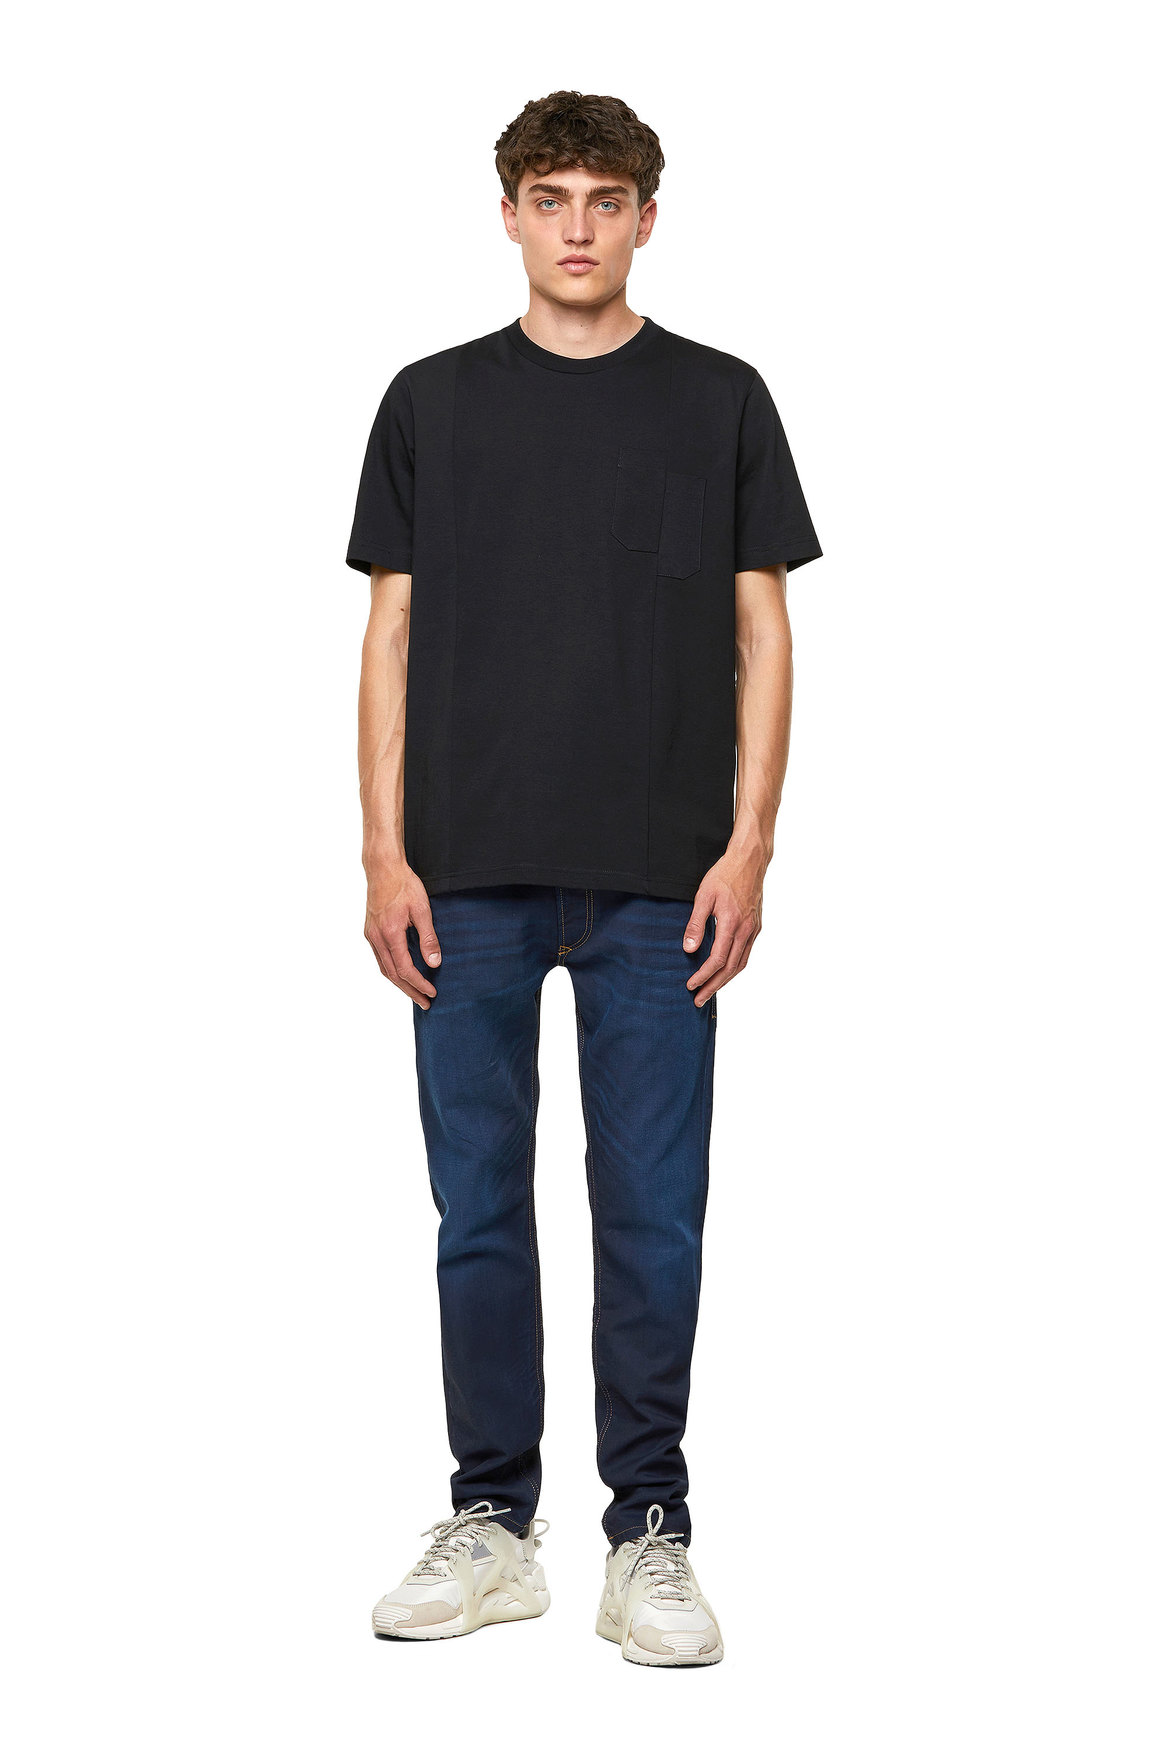 Green Label T-shirt with two-tone panels | Diesel